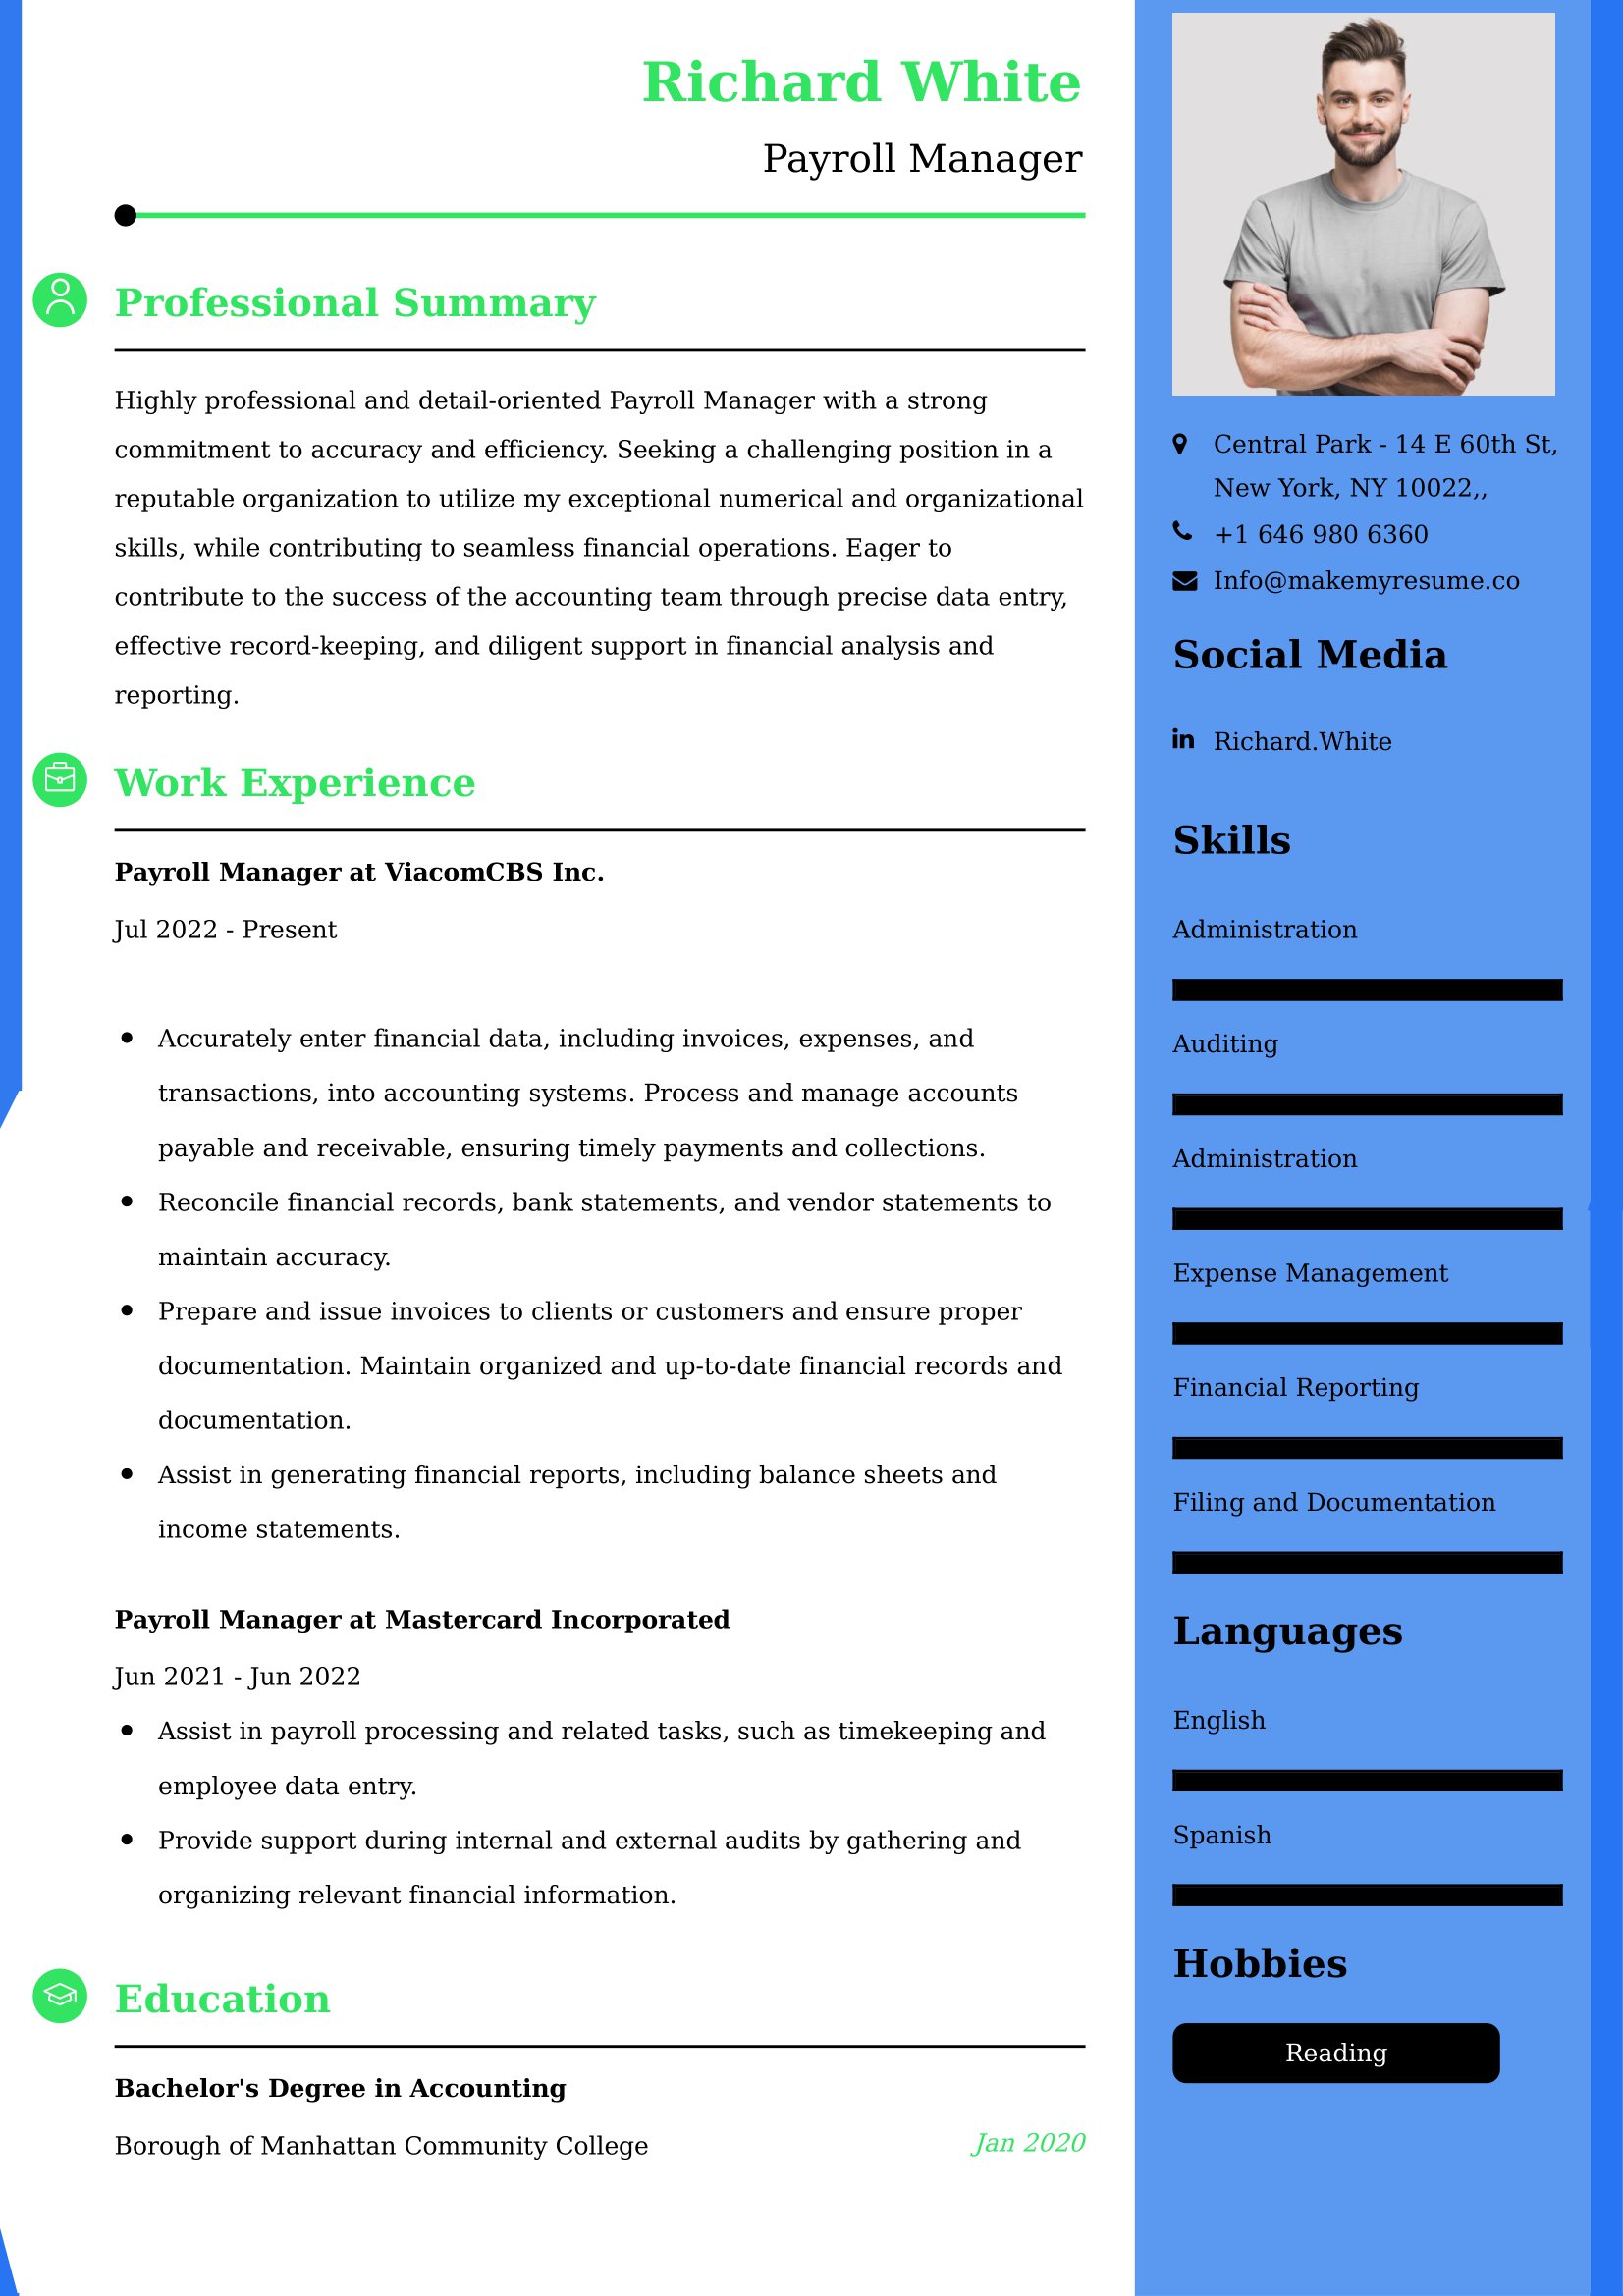 Payroll Manager Resume Examples - UK Format, Latest Template.